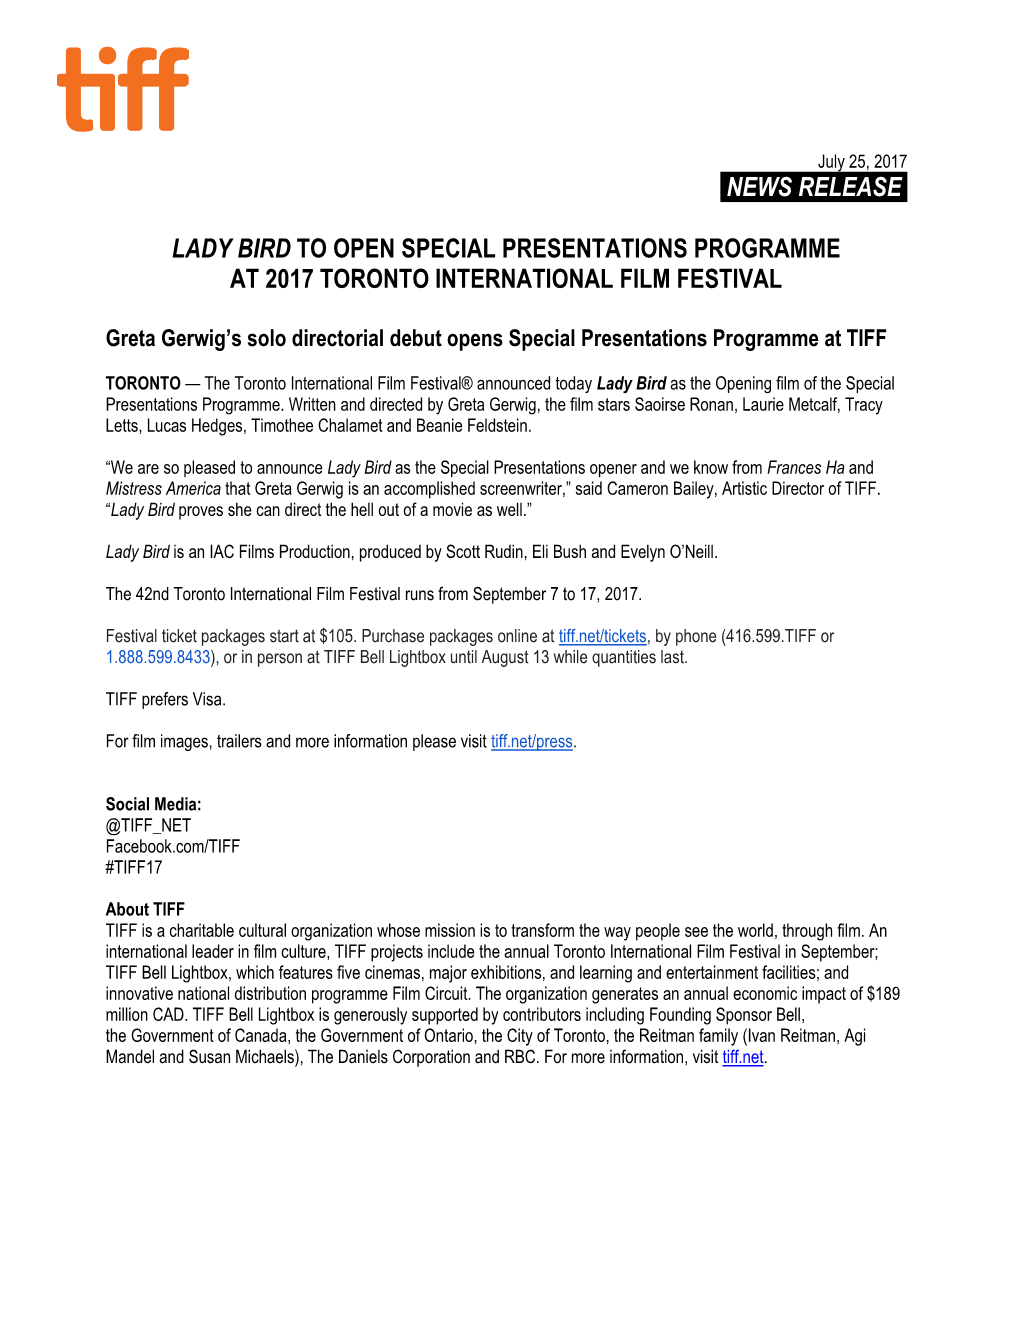 News Release. Lady Bird to Open Special